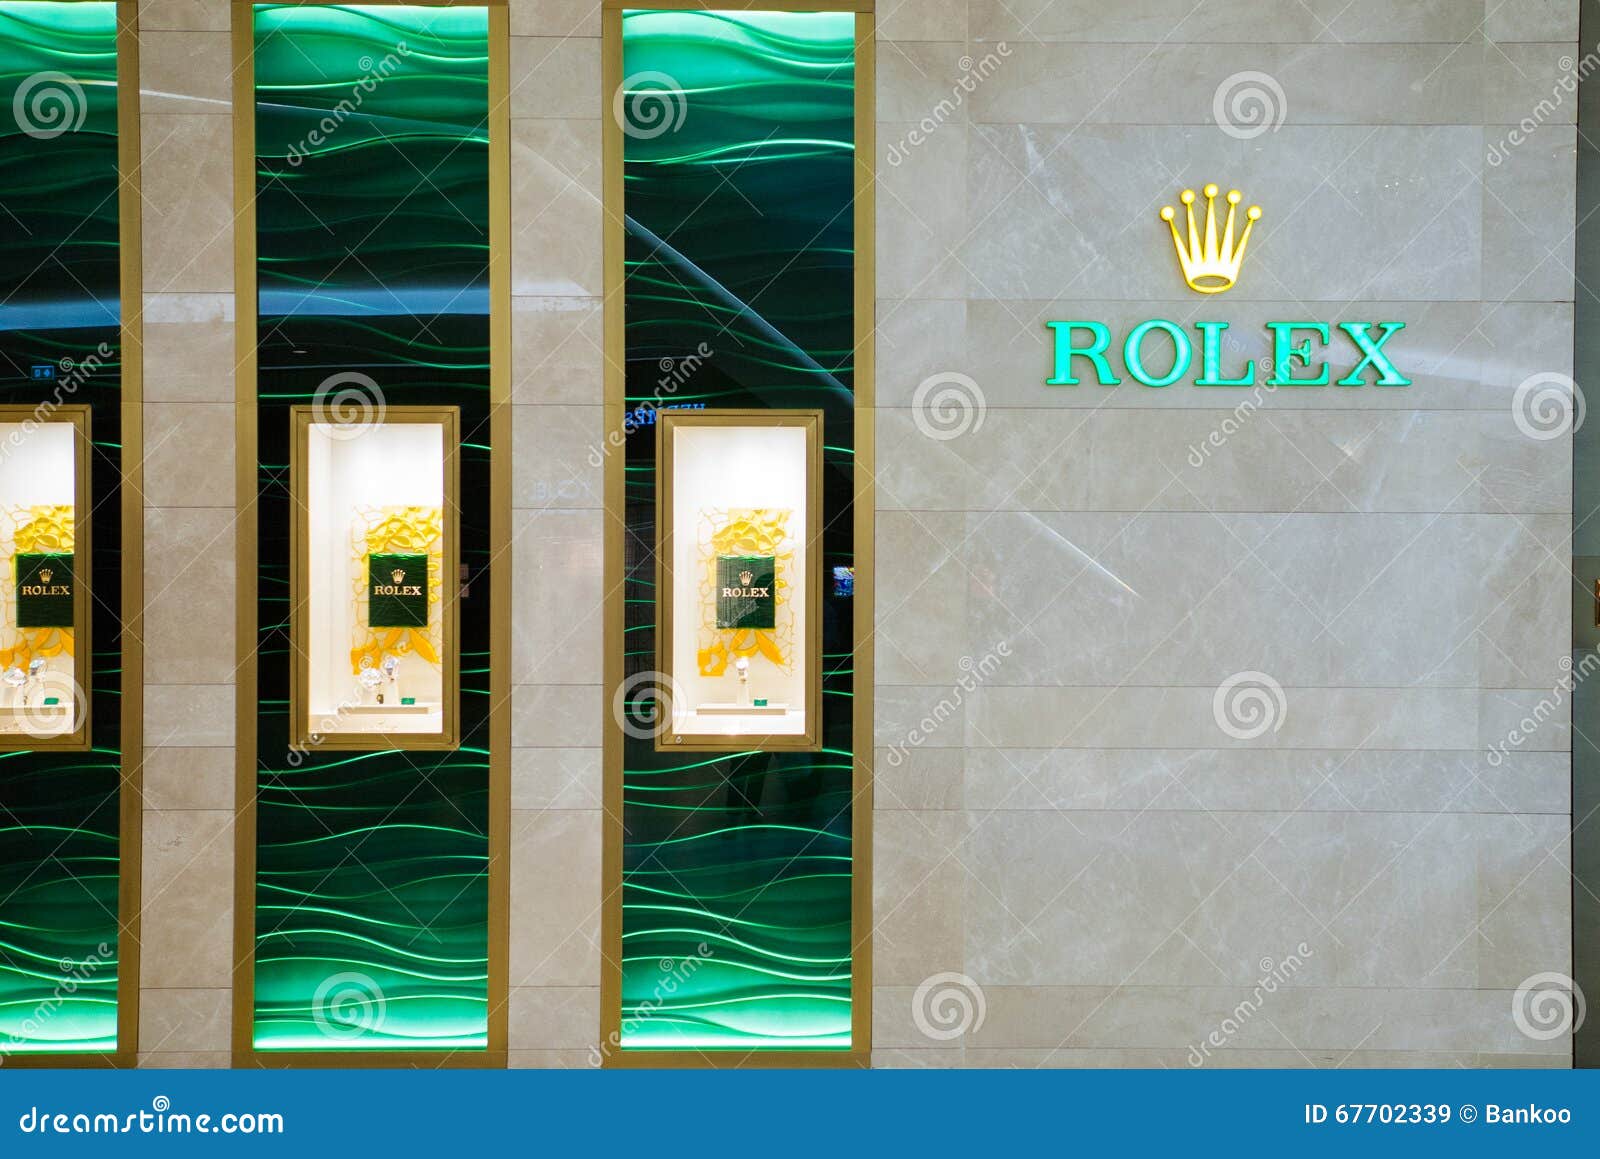 rolex central